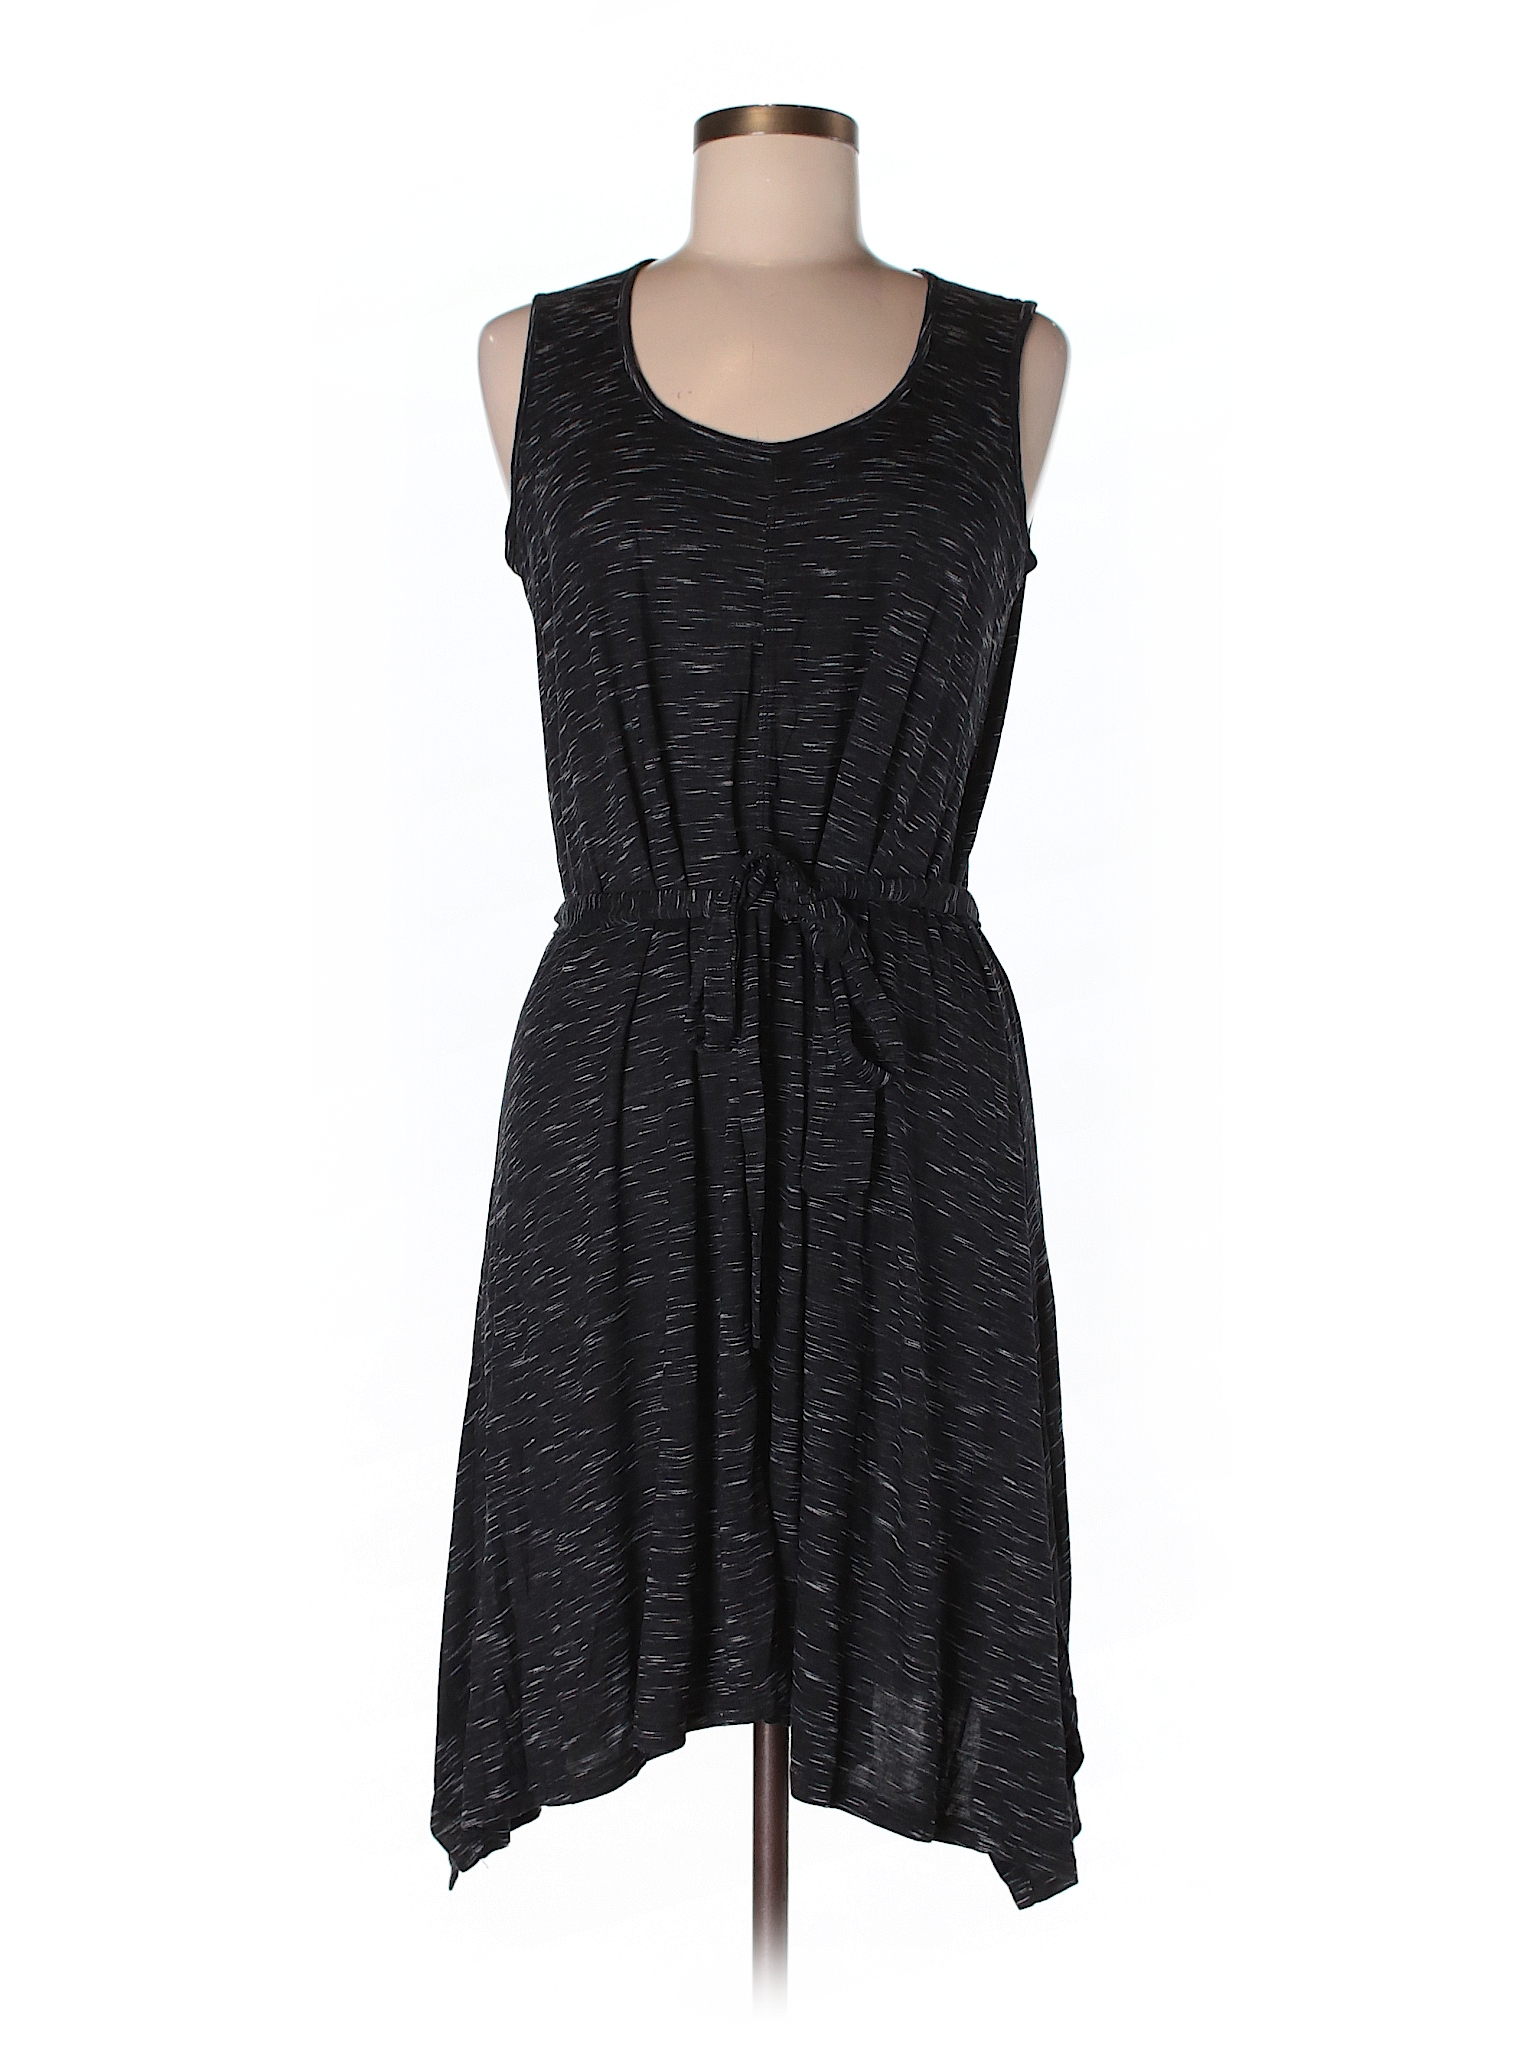 Belle Gray by Lisa Rinna Print Black Casual Dress Size M (Petite) - 71% ...